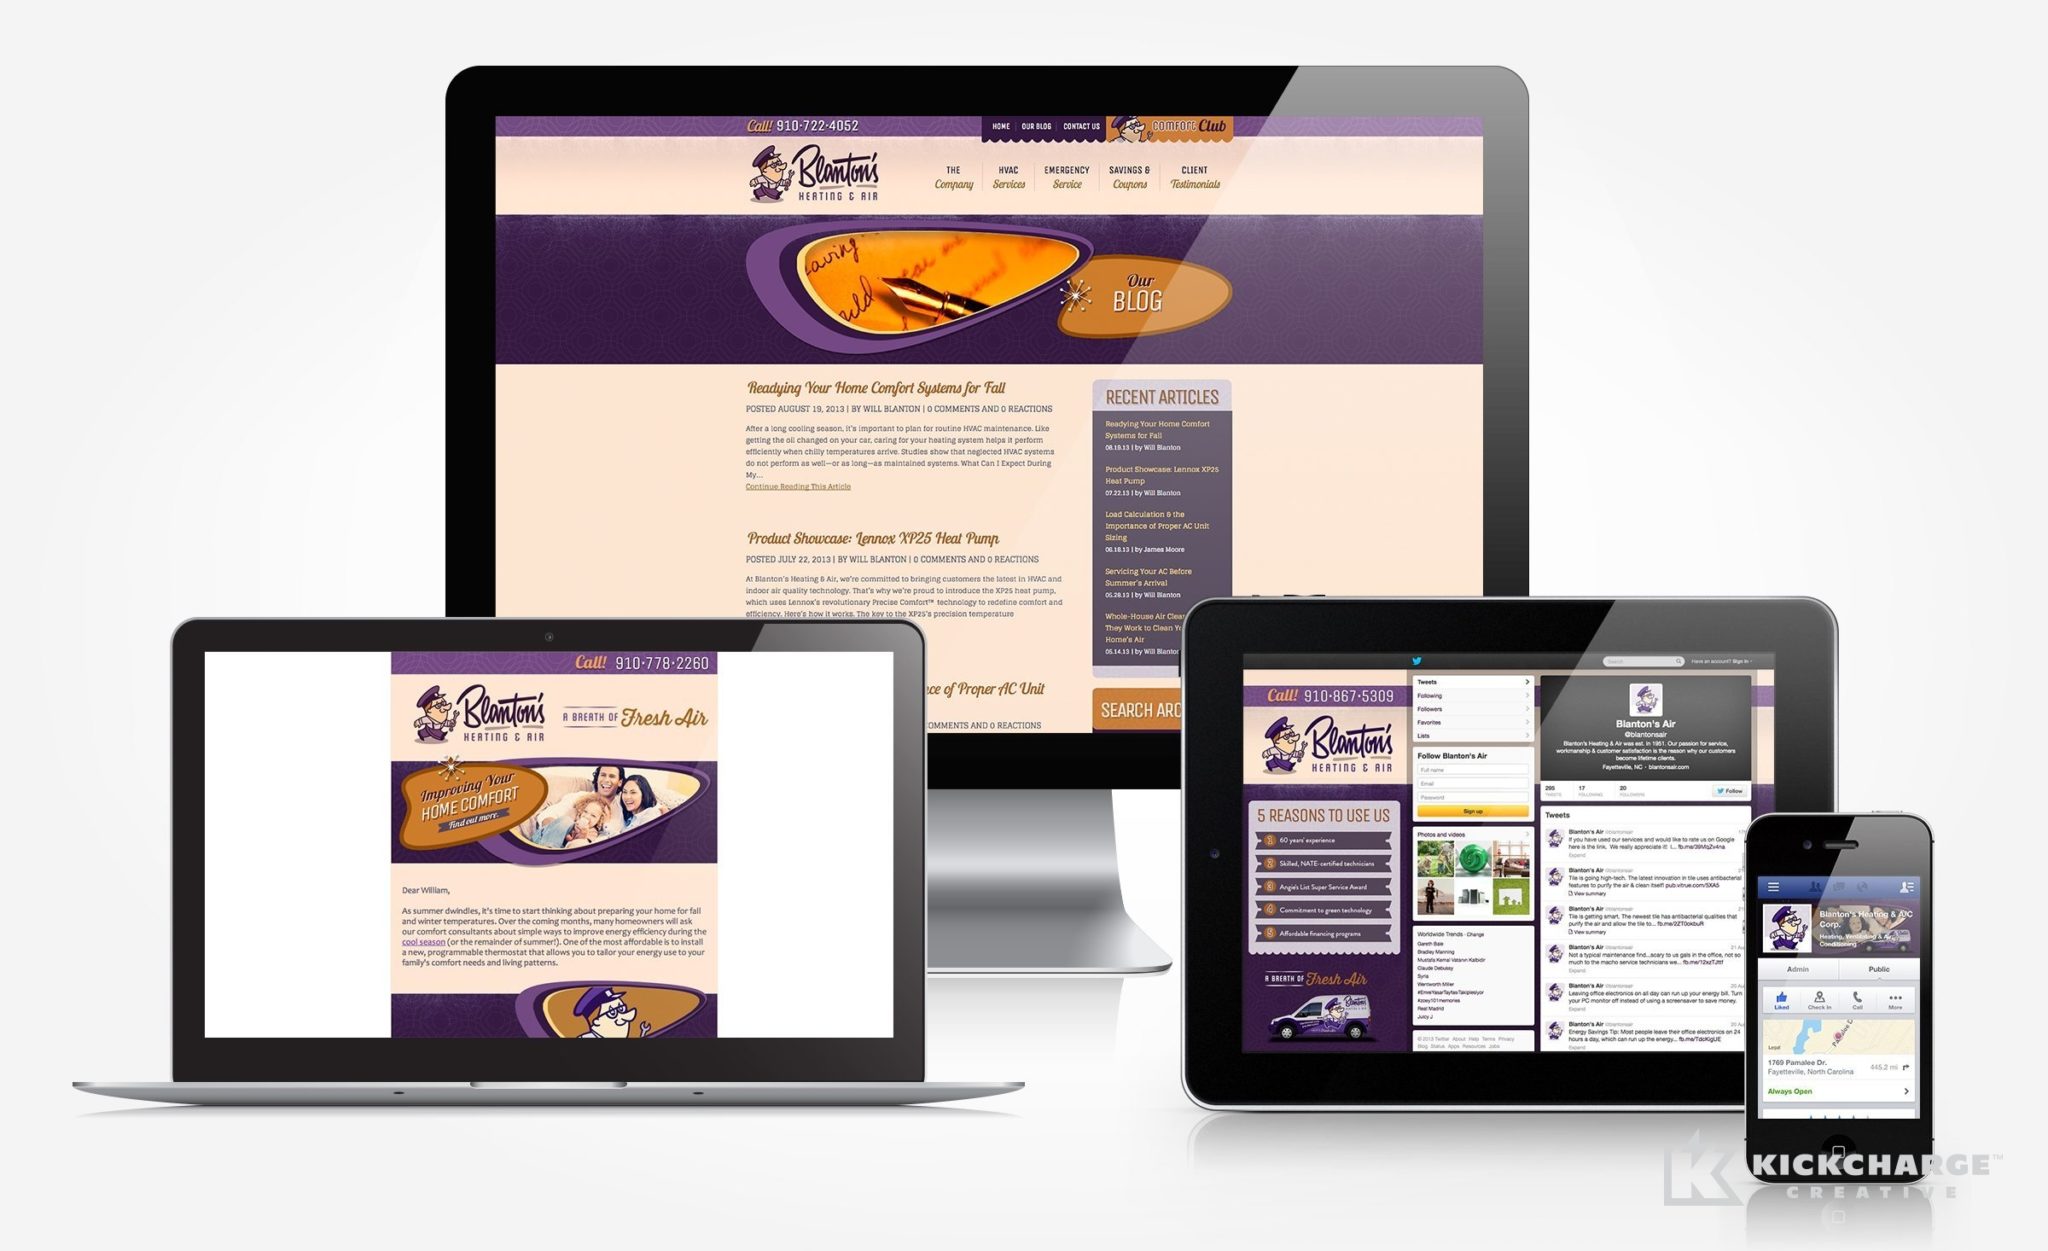 Facebook, Twitter, blog and email newsletter design and management for Blanton's Air, Plumbing & Electric.